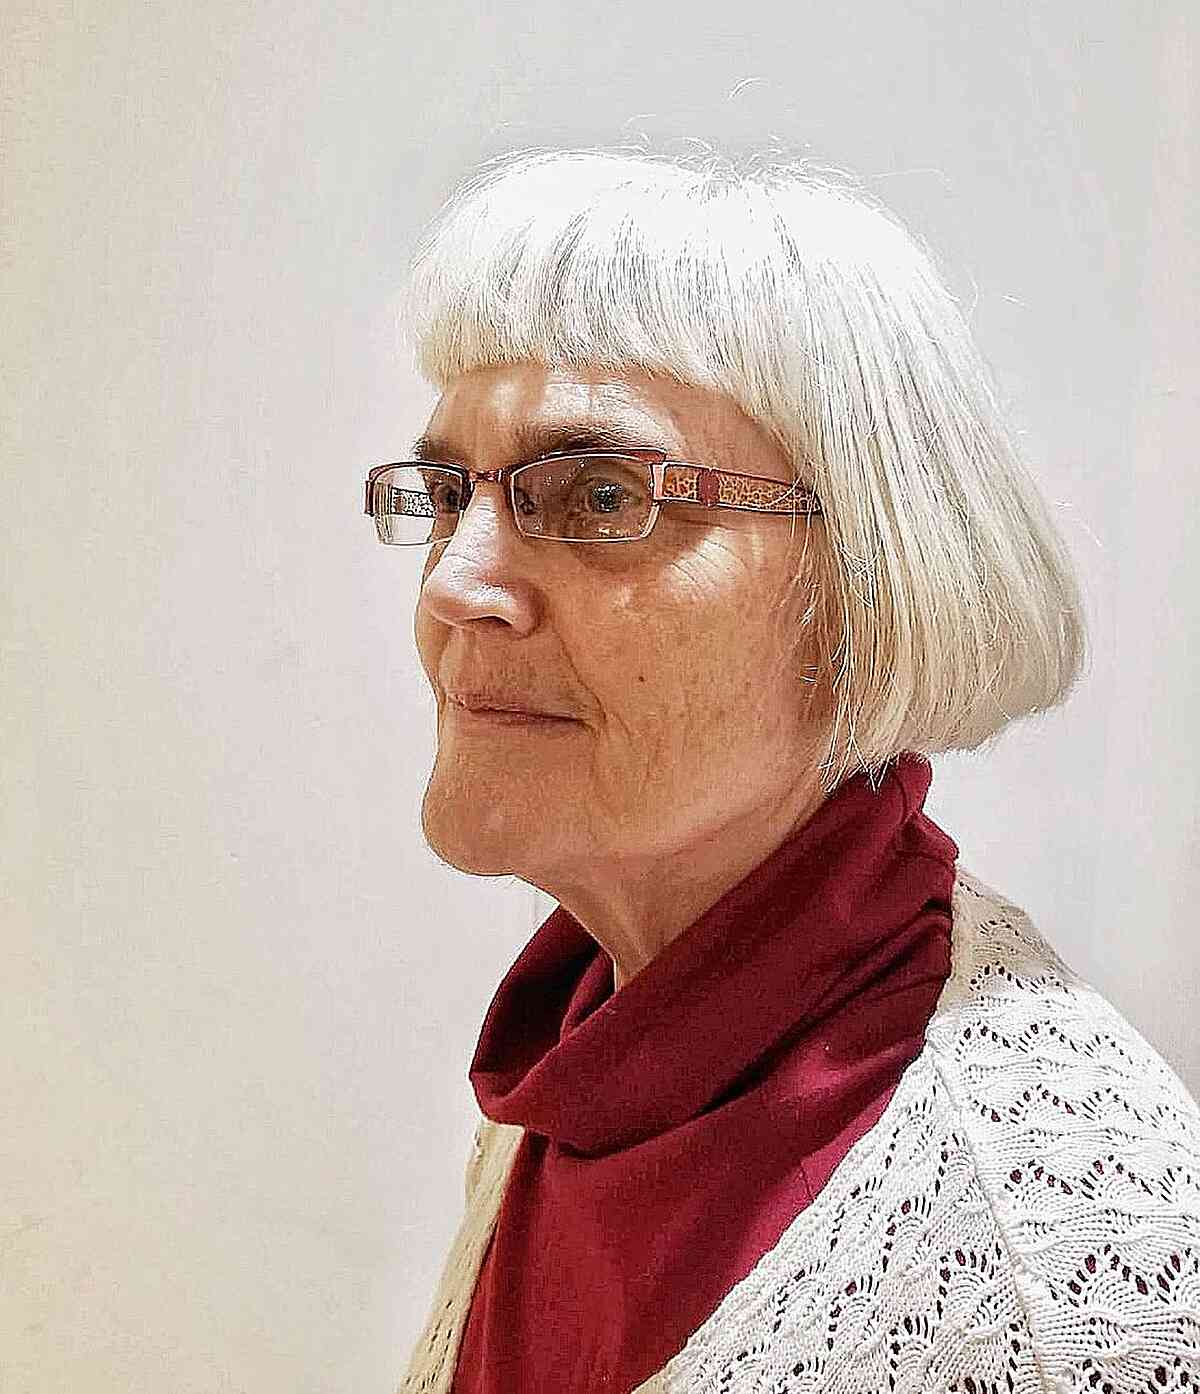 Short One-Length Thick Cut with Blunt Bangs for ladies in their 60s with glasses